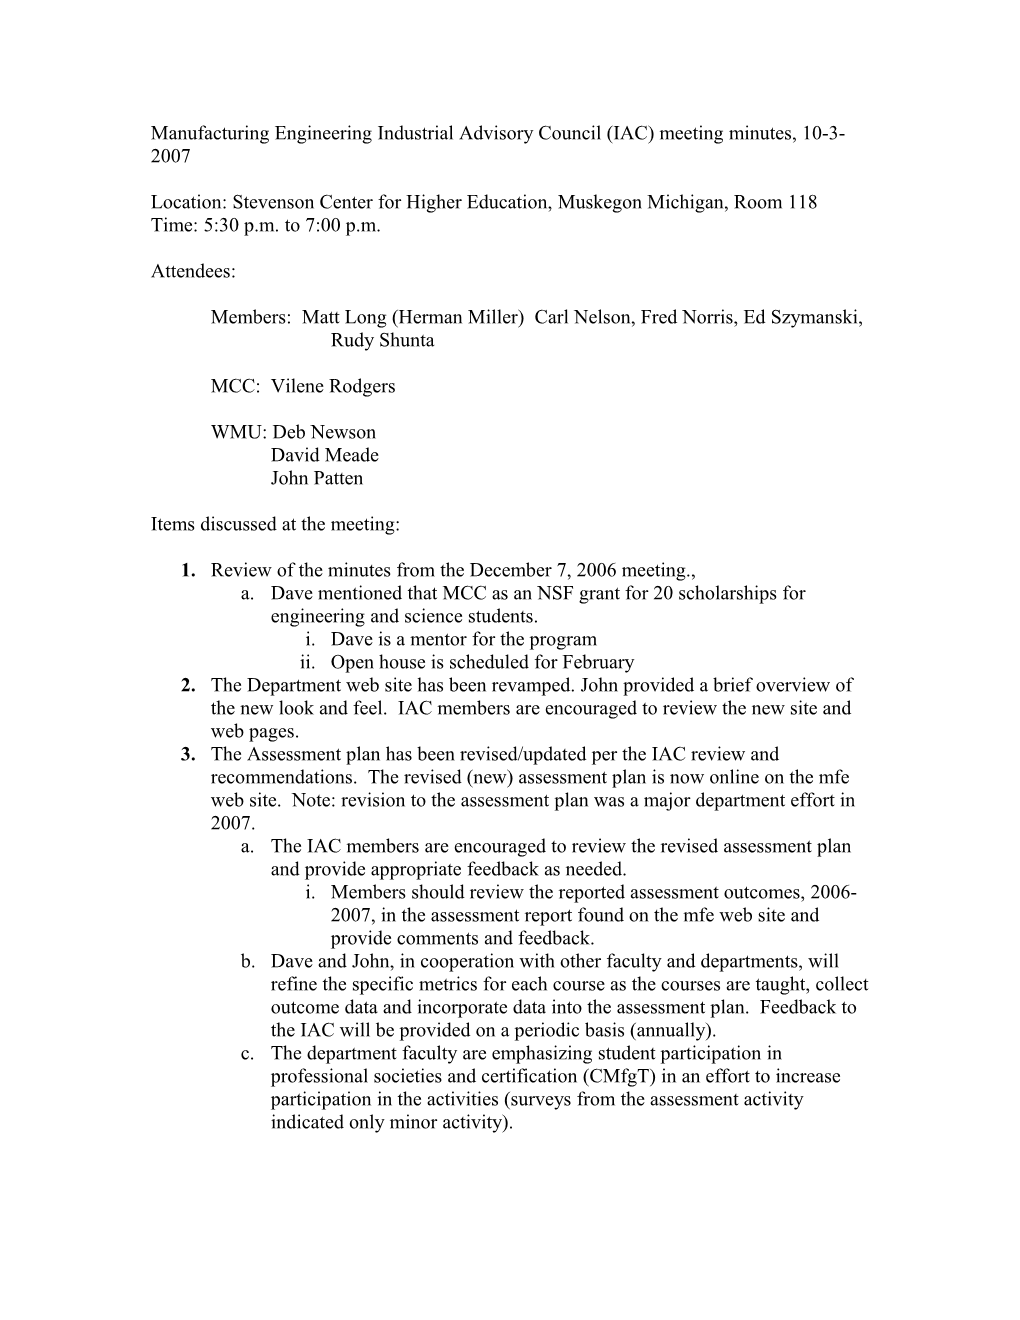 Manufacturing Engineering Industrial Advisory Council (IAC) Meeting Minutes, 10-3-2007